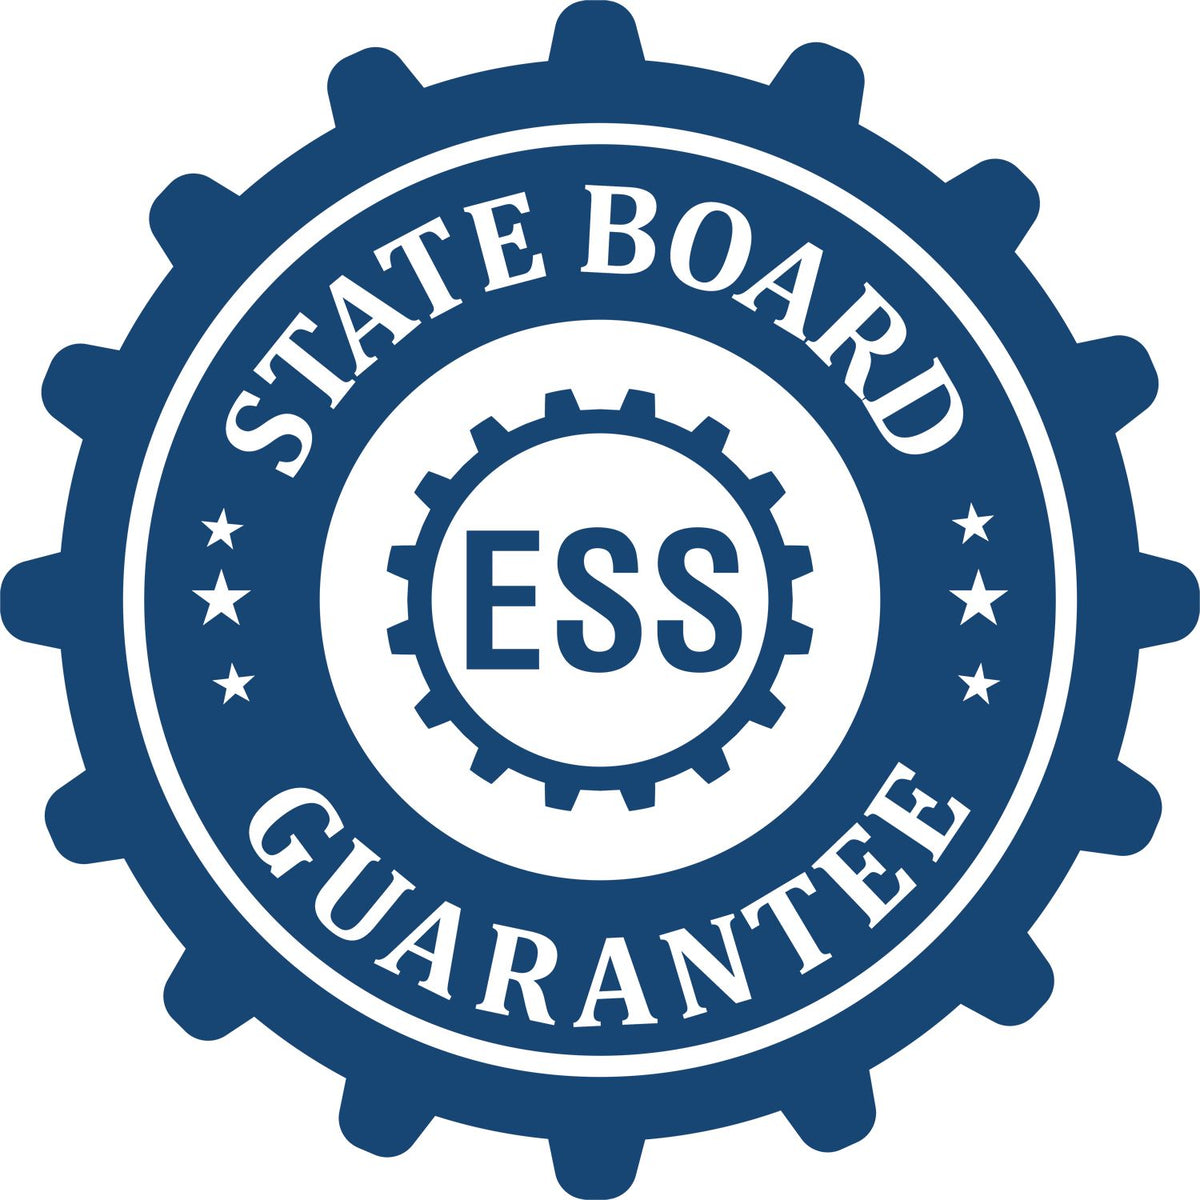 An emblem in a gear shape illustrating a state board guarantee for the Hybrid Idaho Engineer Seal